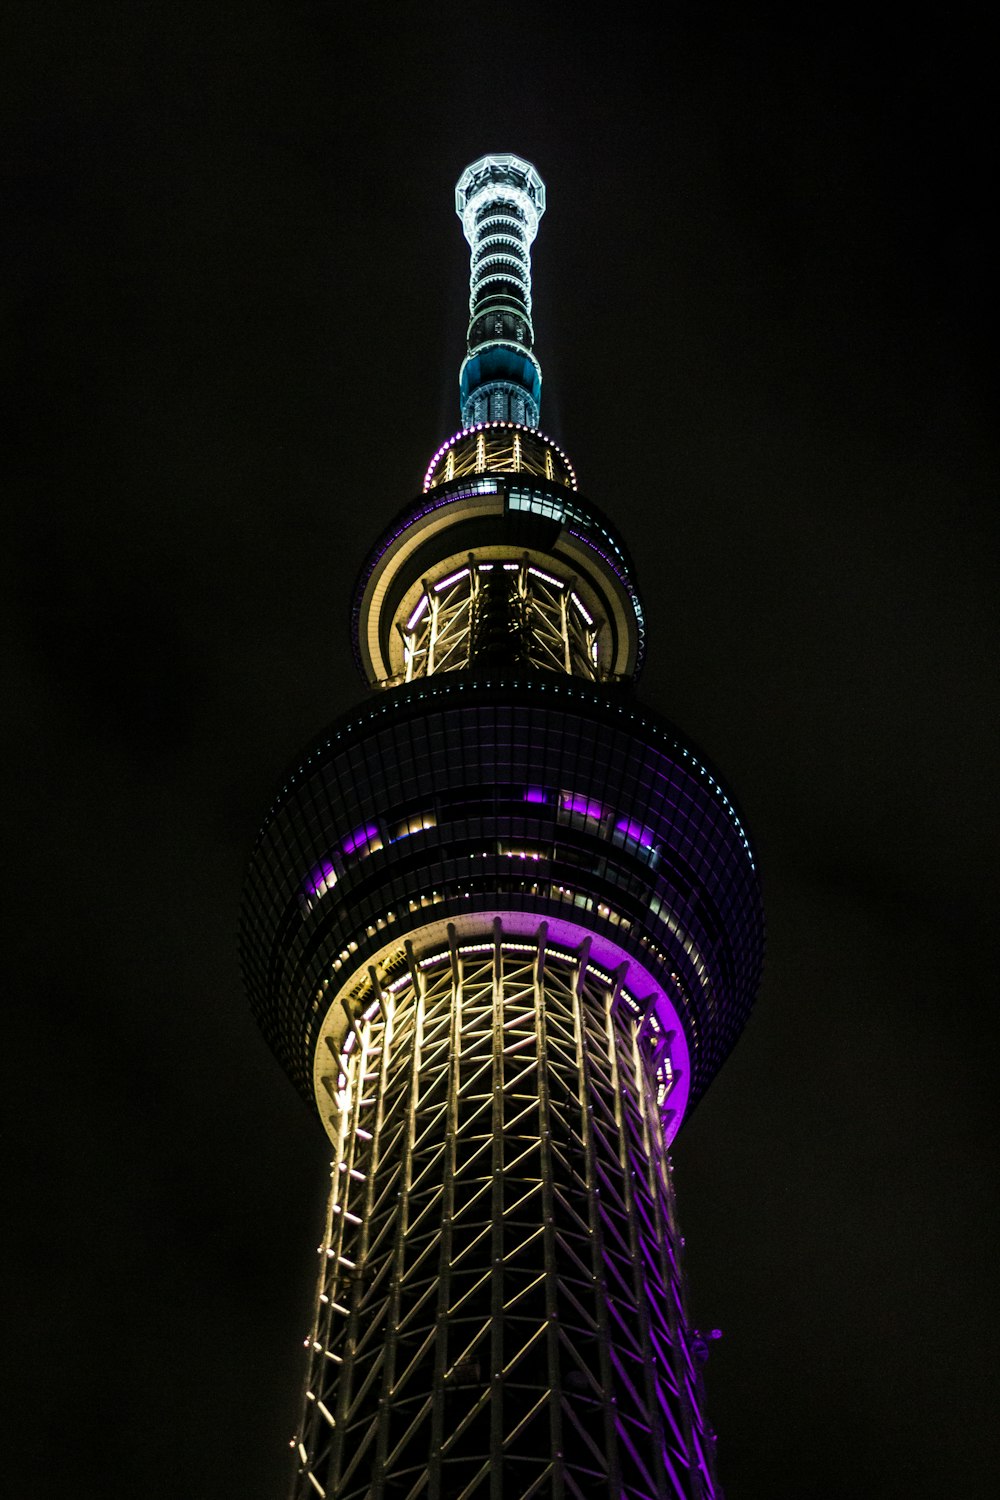 the top of a tall tower lit up at night